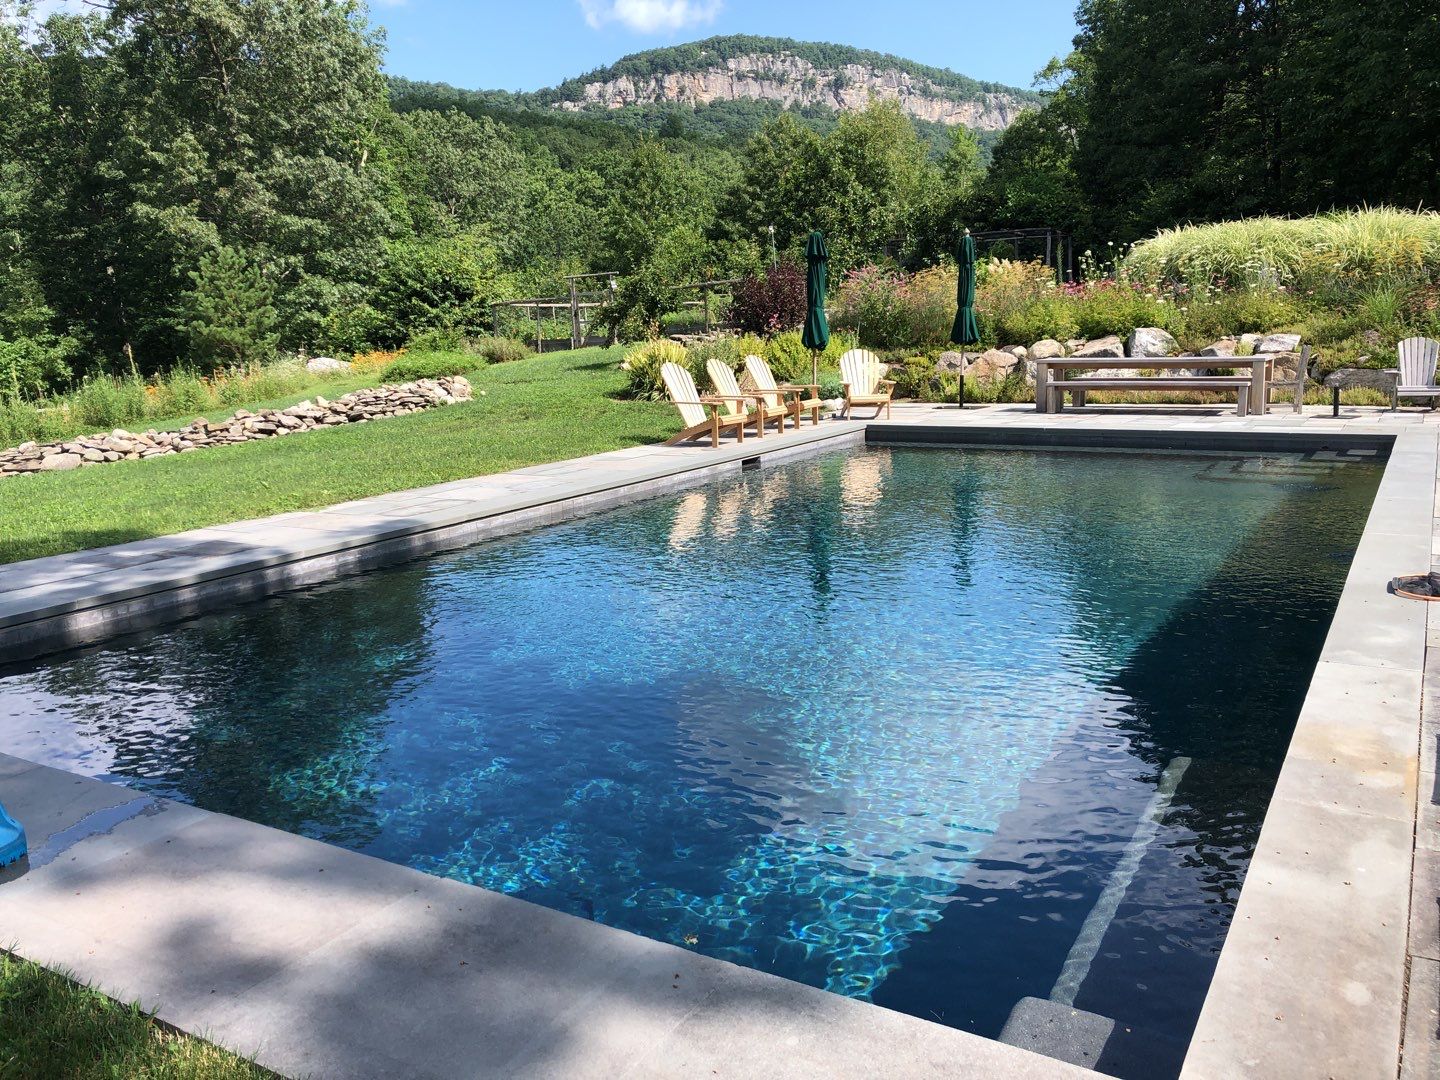 a stunning gunite pool created by Neave Group showing the difference between gunite vs vinyl pools